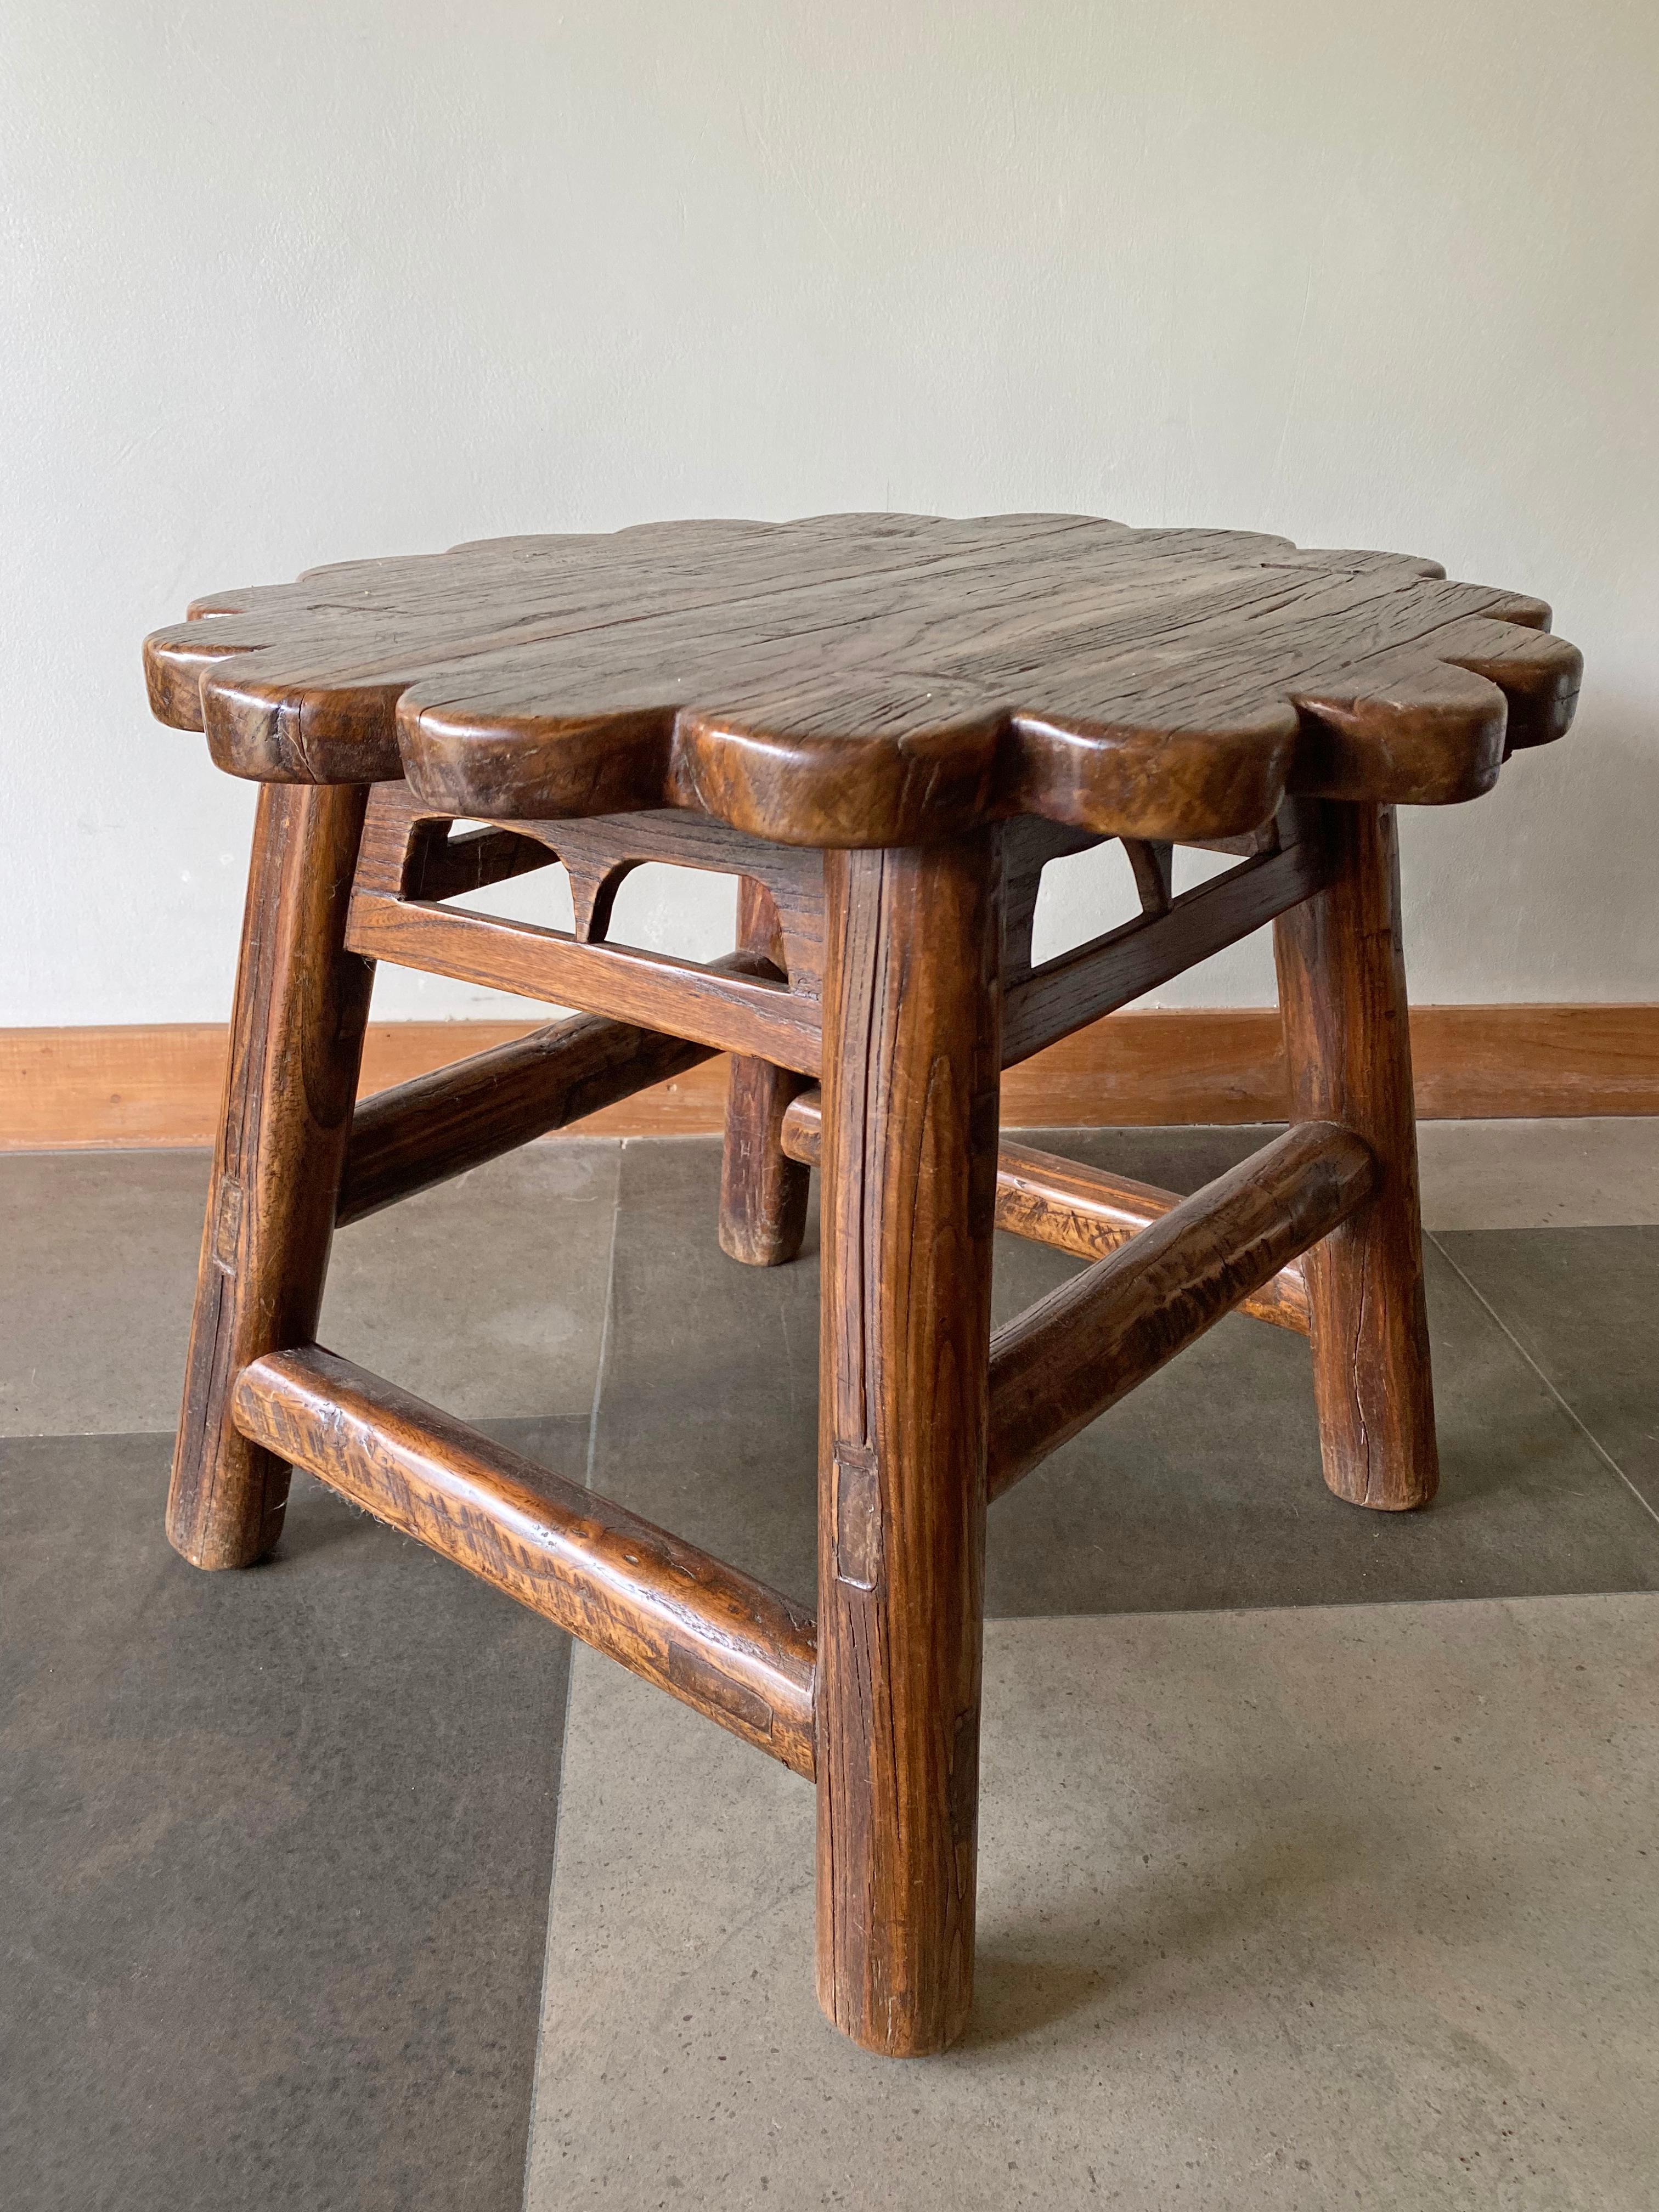 Hand-Crafted Chinese Lacquered Stool with Floral Detail from Elm Wood, Early 20th Century